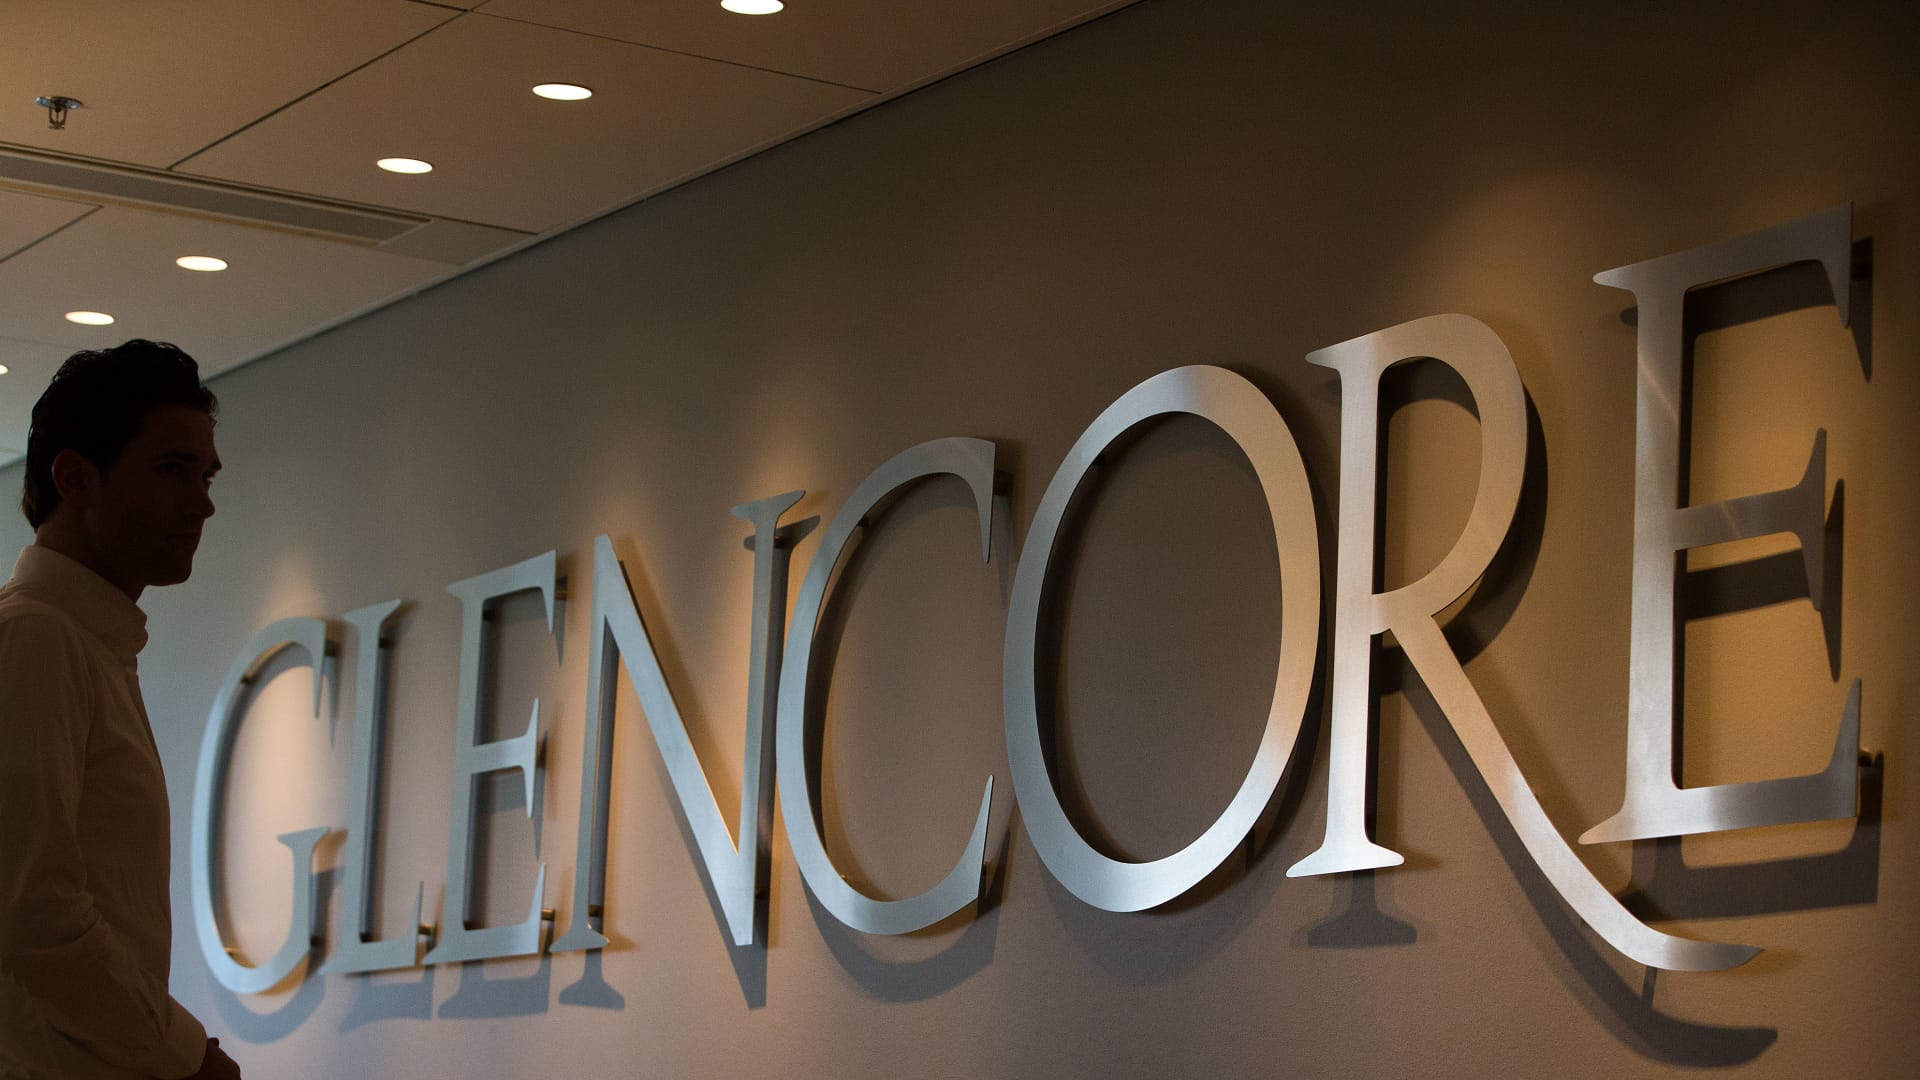 Investor Tribeca presents Glencore with ideas to raise shareholder value – How it may unfold